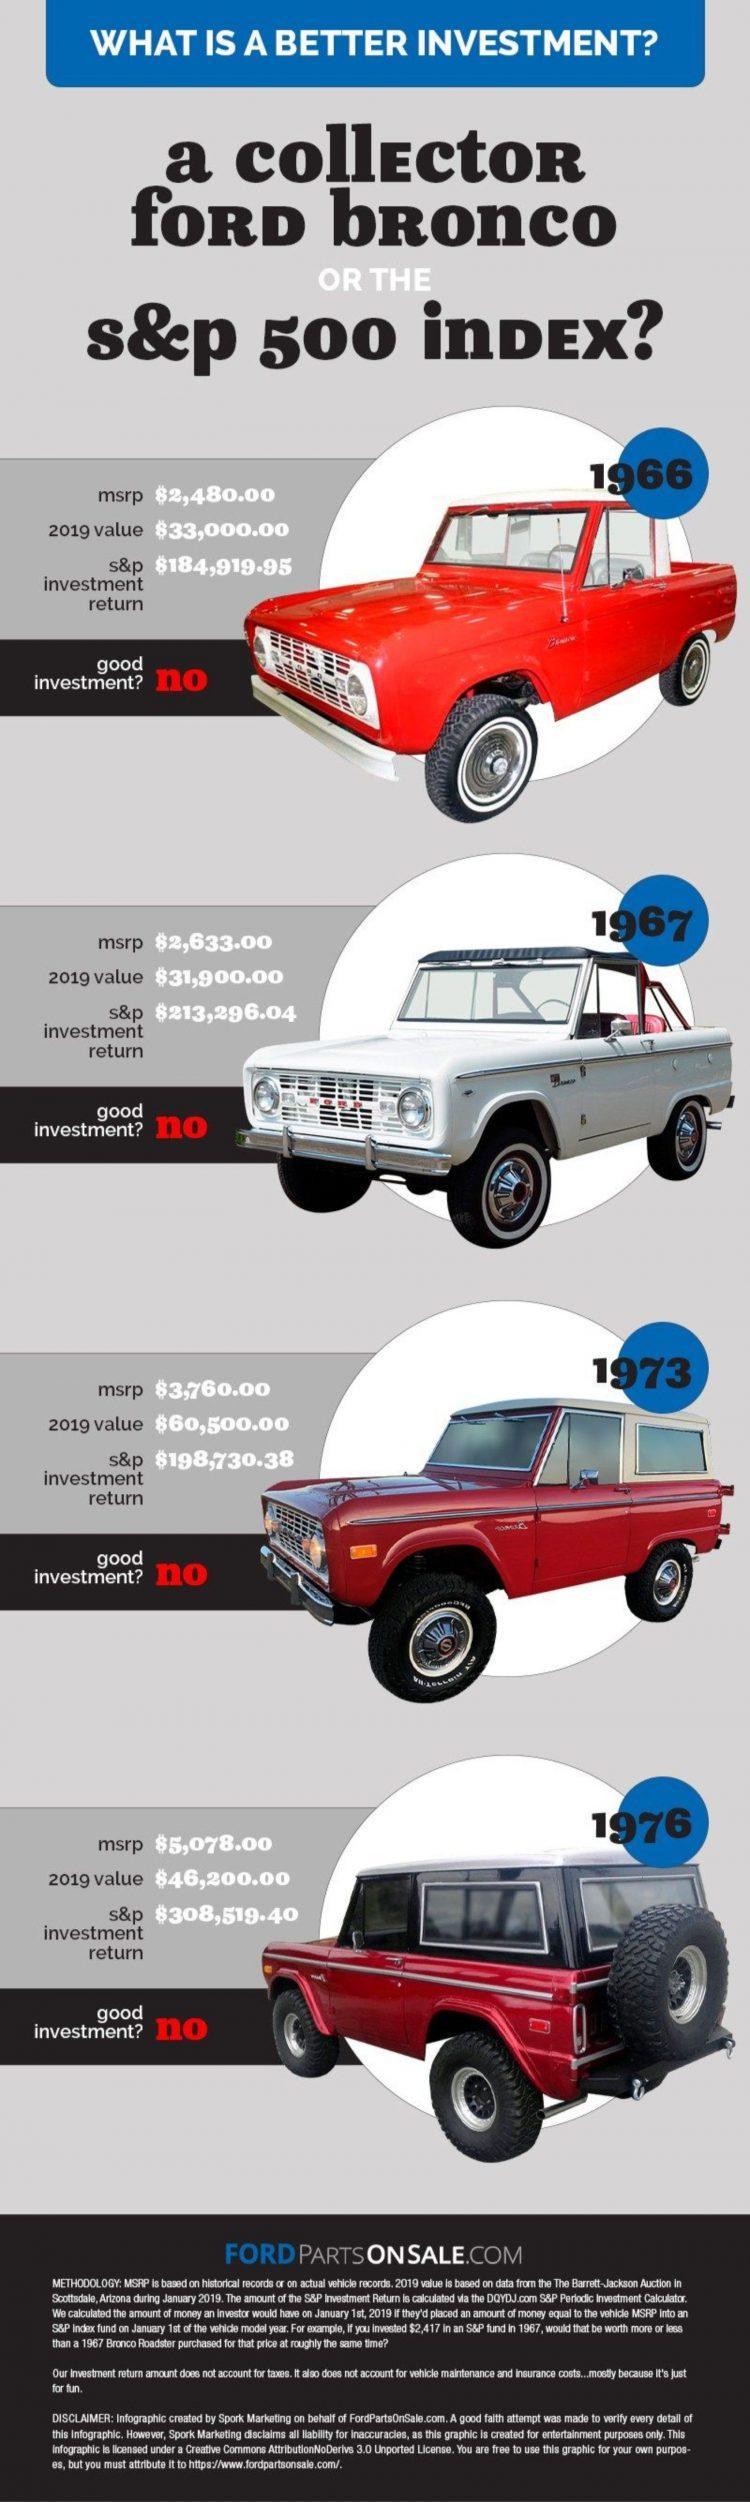 ford bronco investment